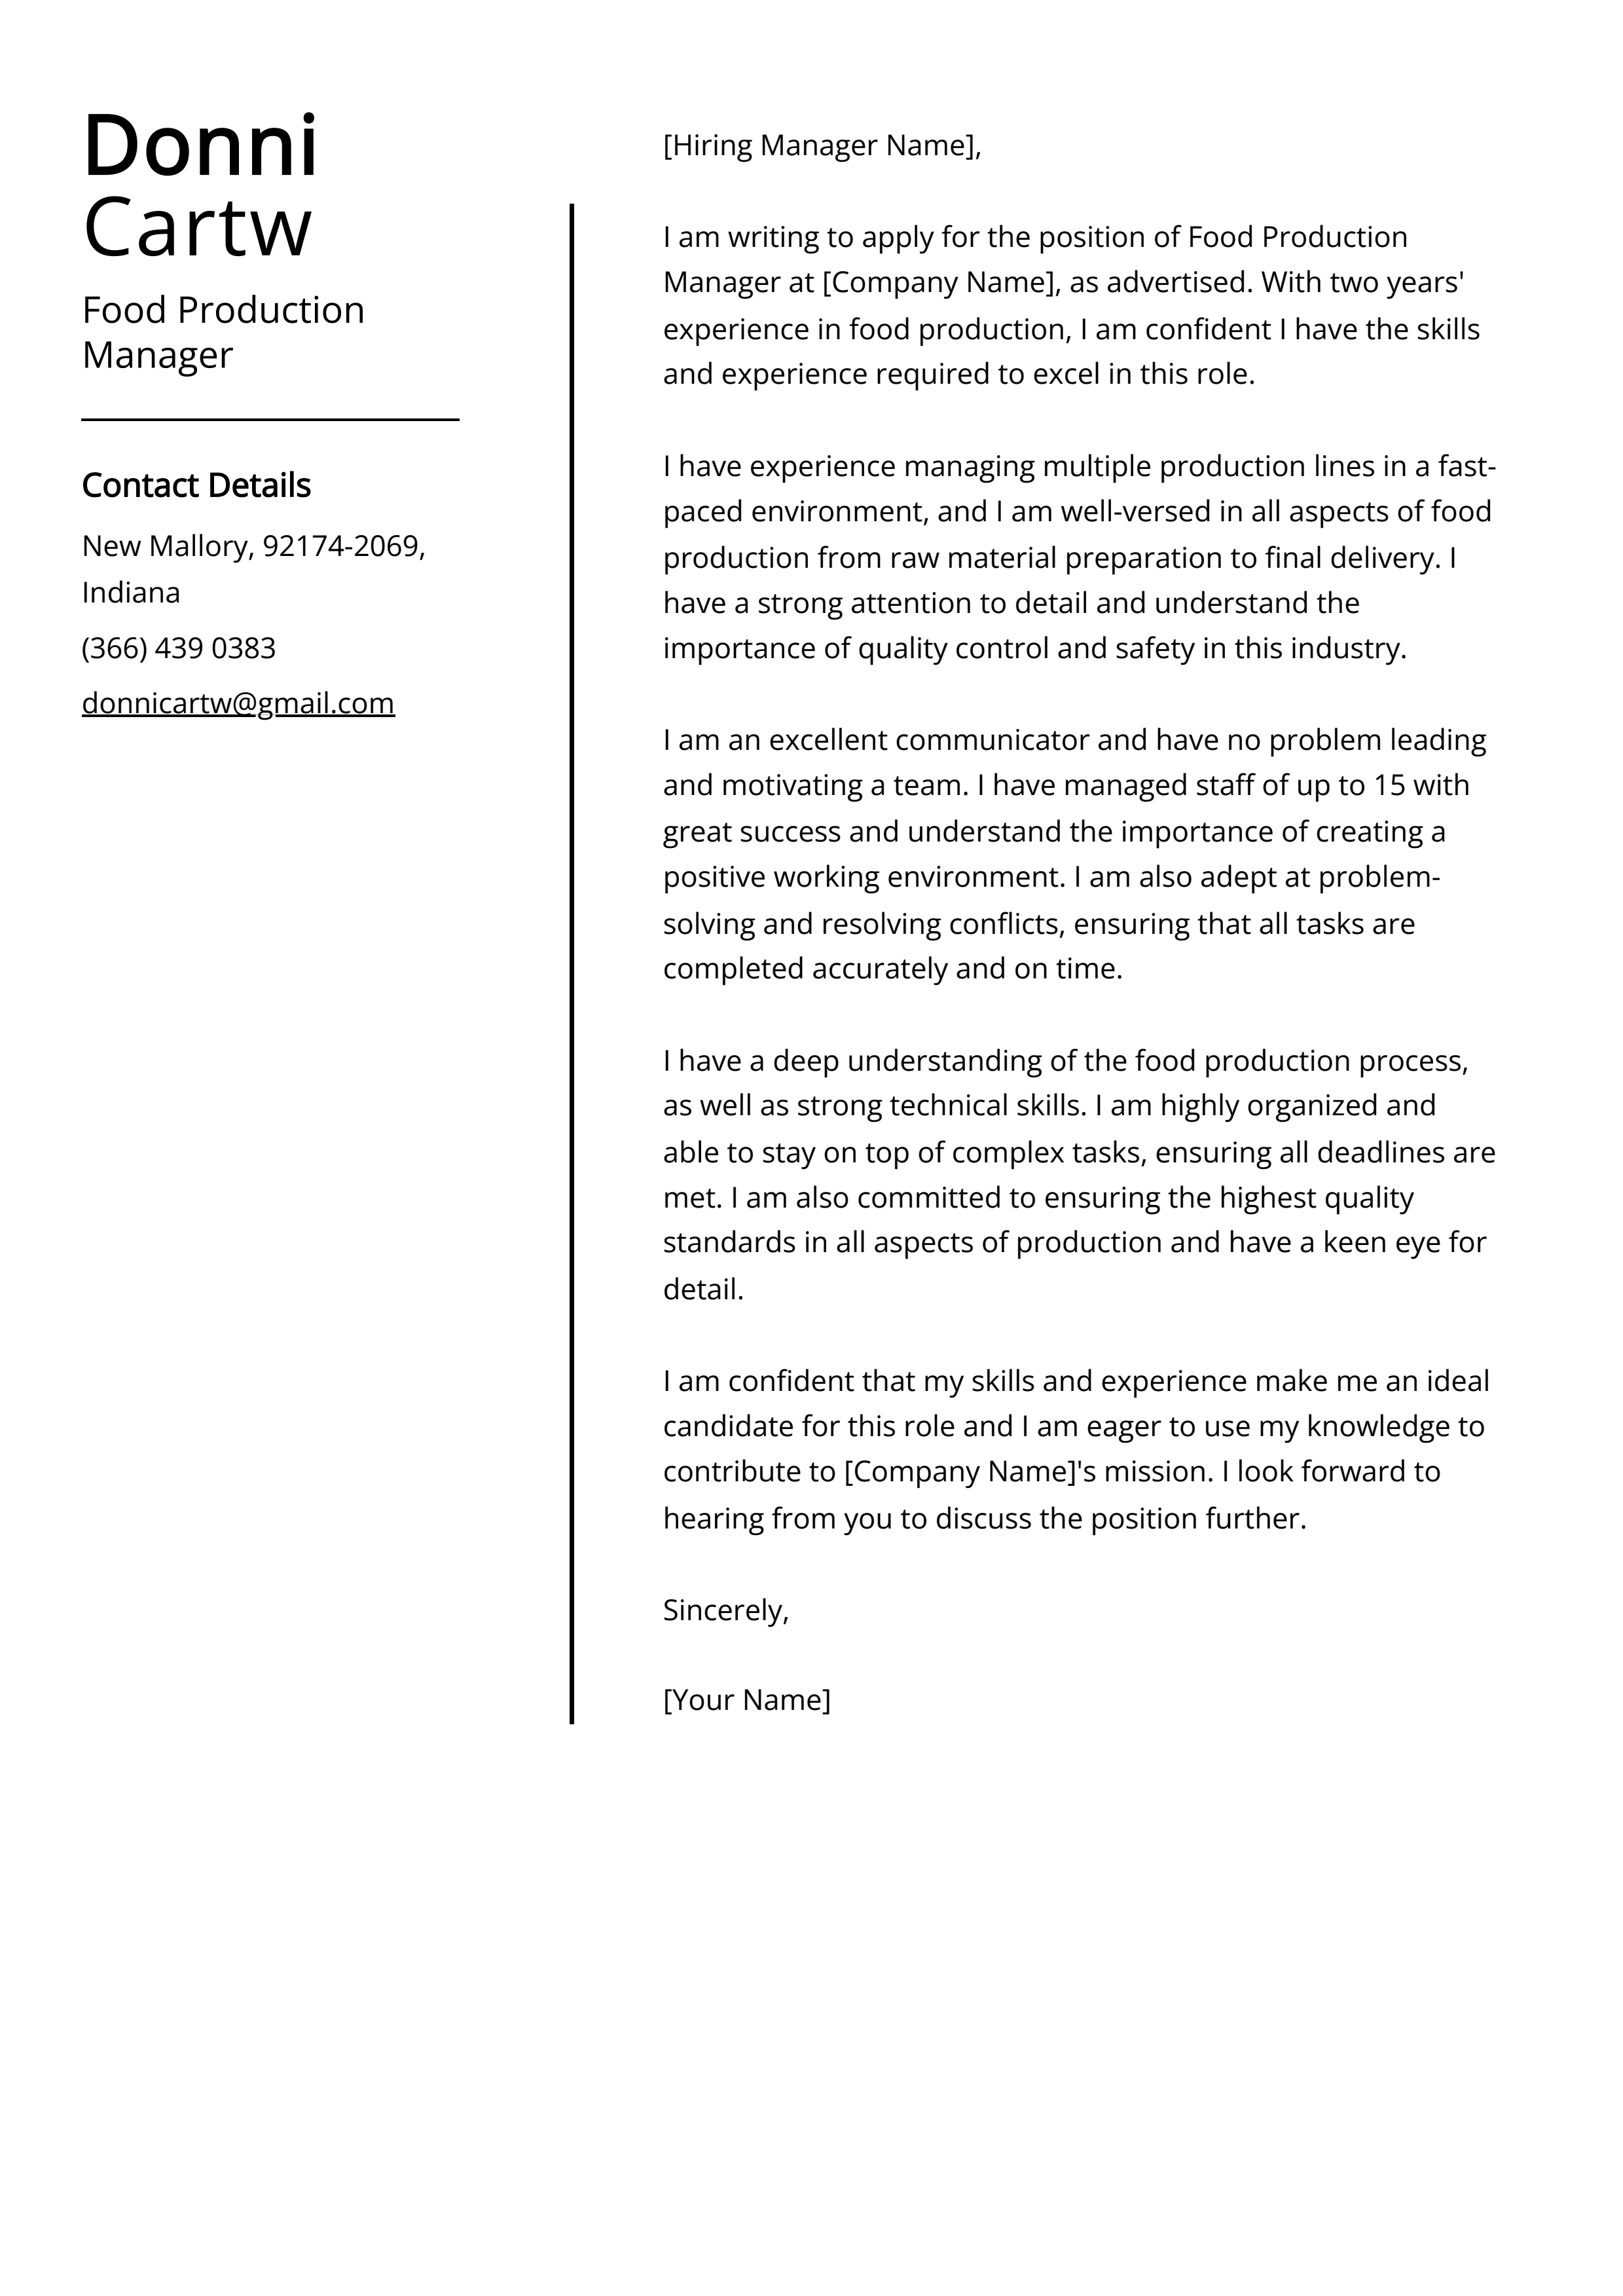 Food Production Manager Cover Letter Example